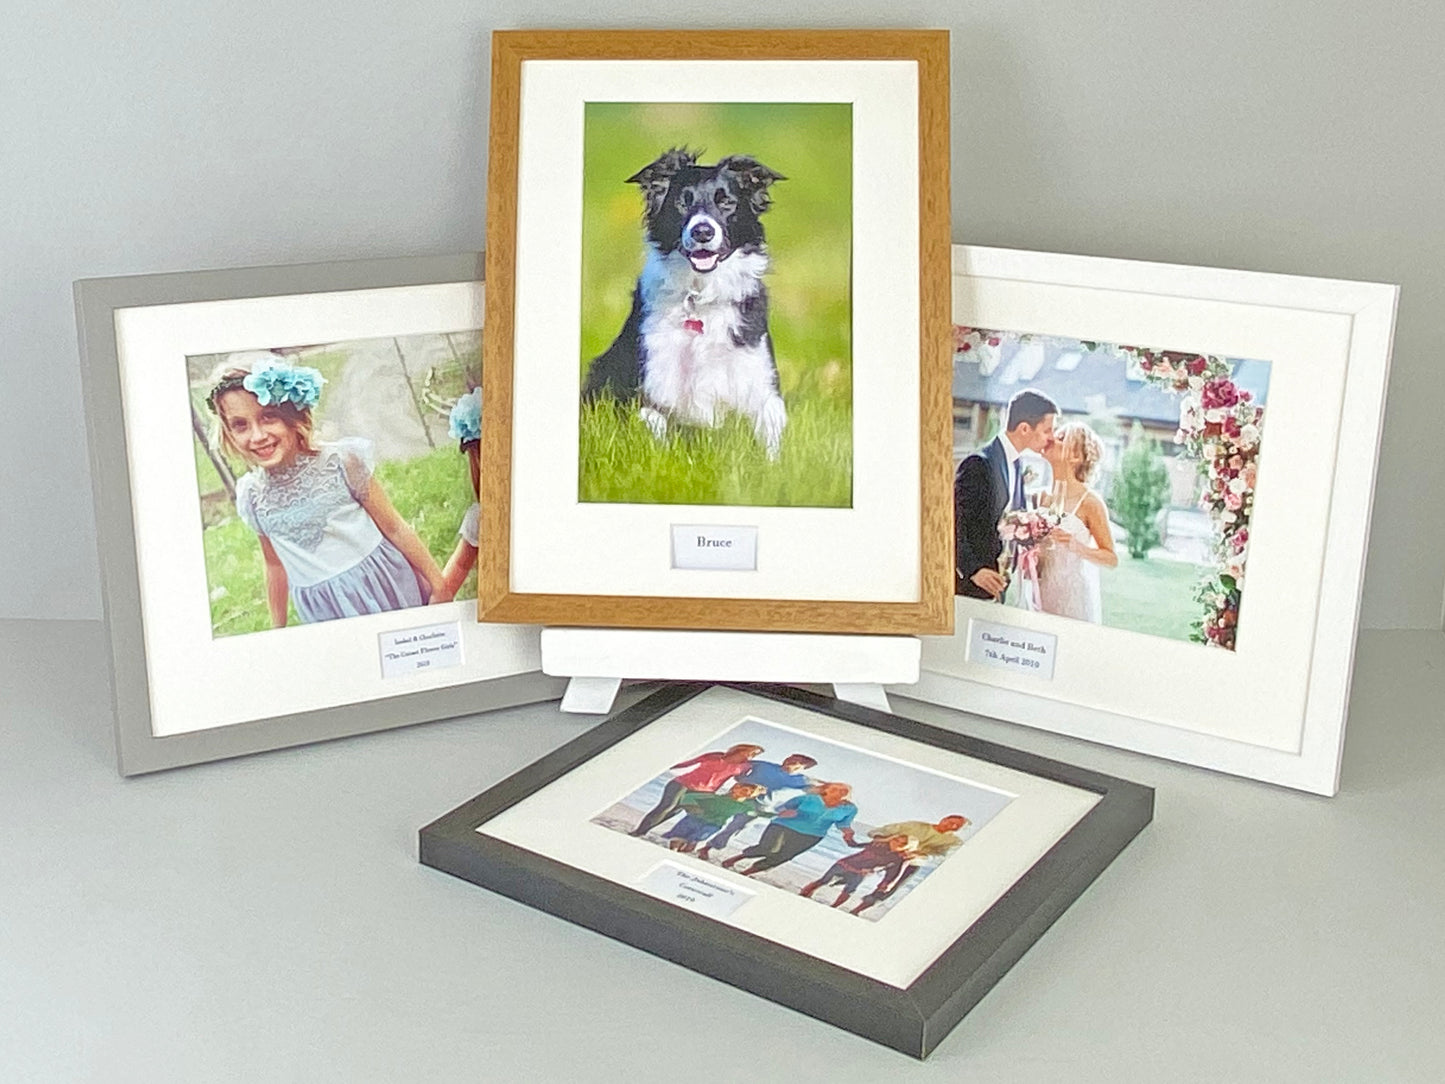 Personalised Graduation Frames. 30x40cm Portrait Frame with 12x8 inch Photo. Your Text and Photo to treasure a special Memory. A Perfect Gift.